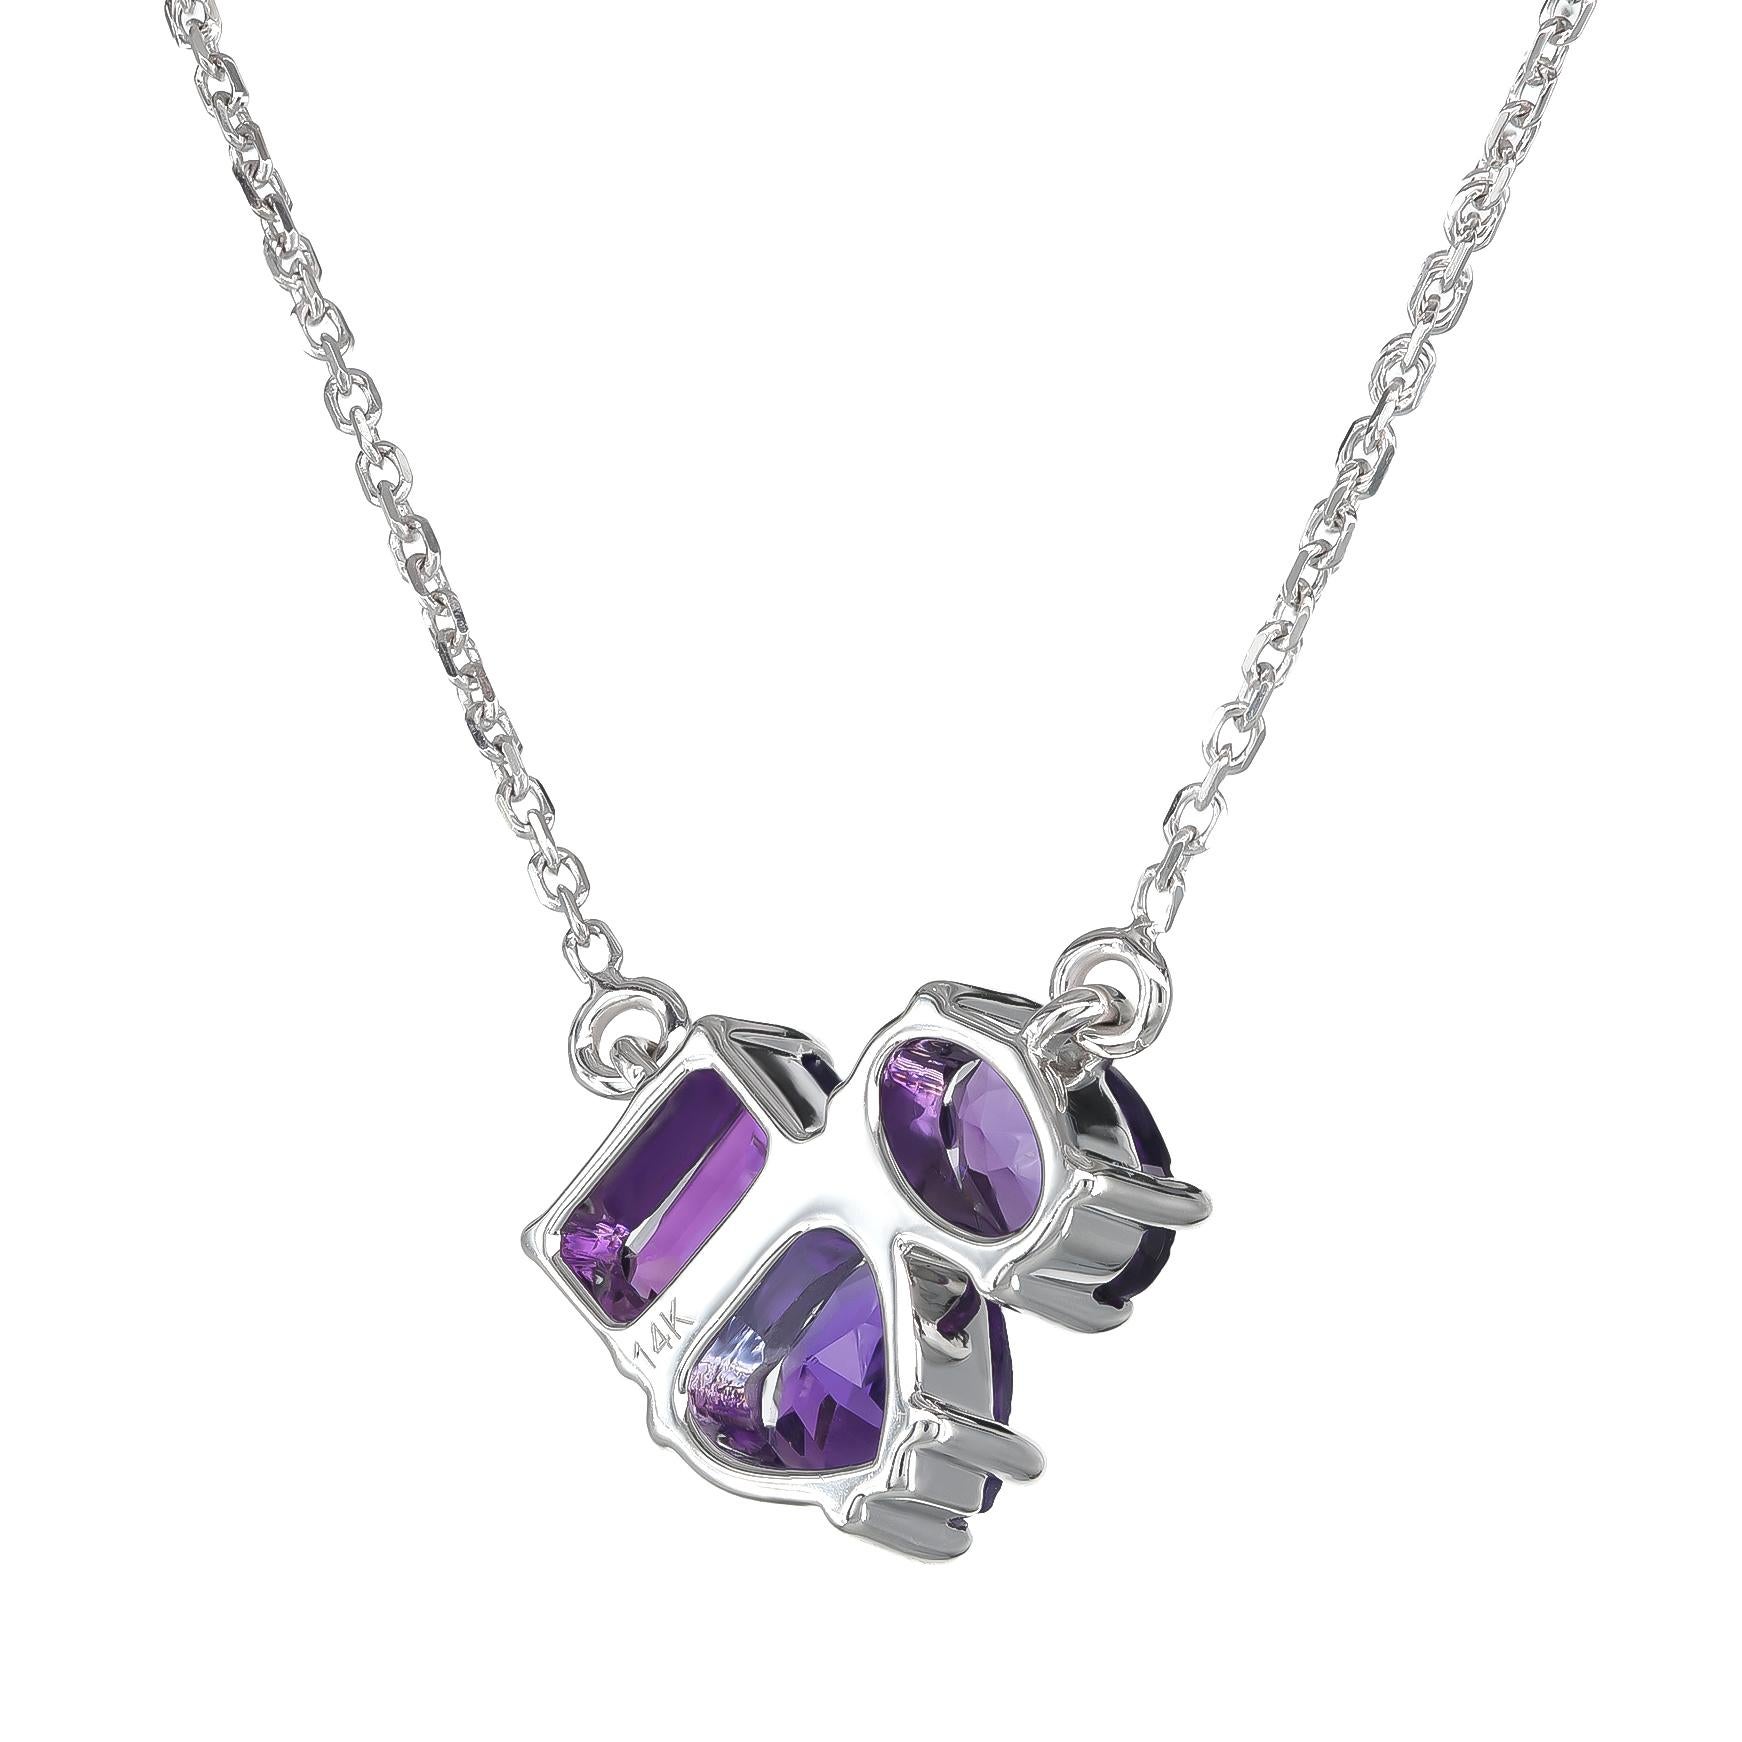 Mixed Cut Pendant with 1.42 carats Amethyst set in 14K White Gold For Sale